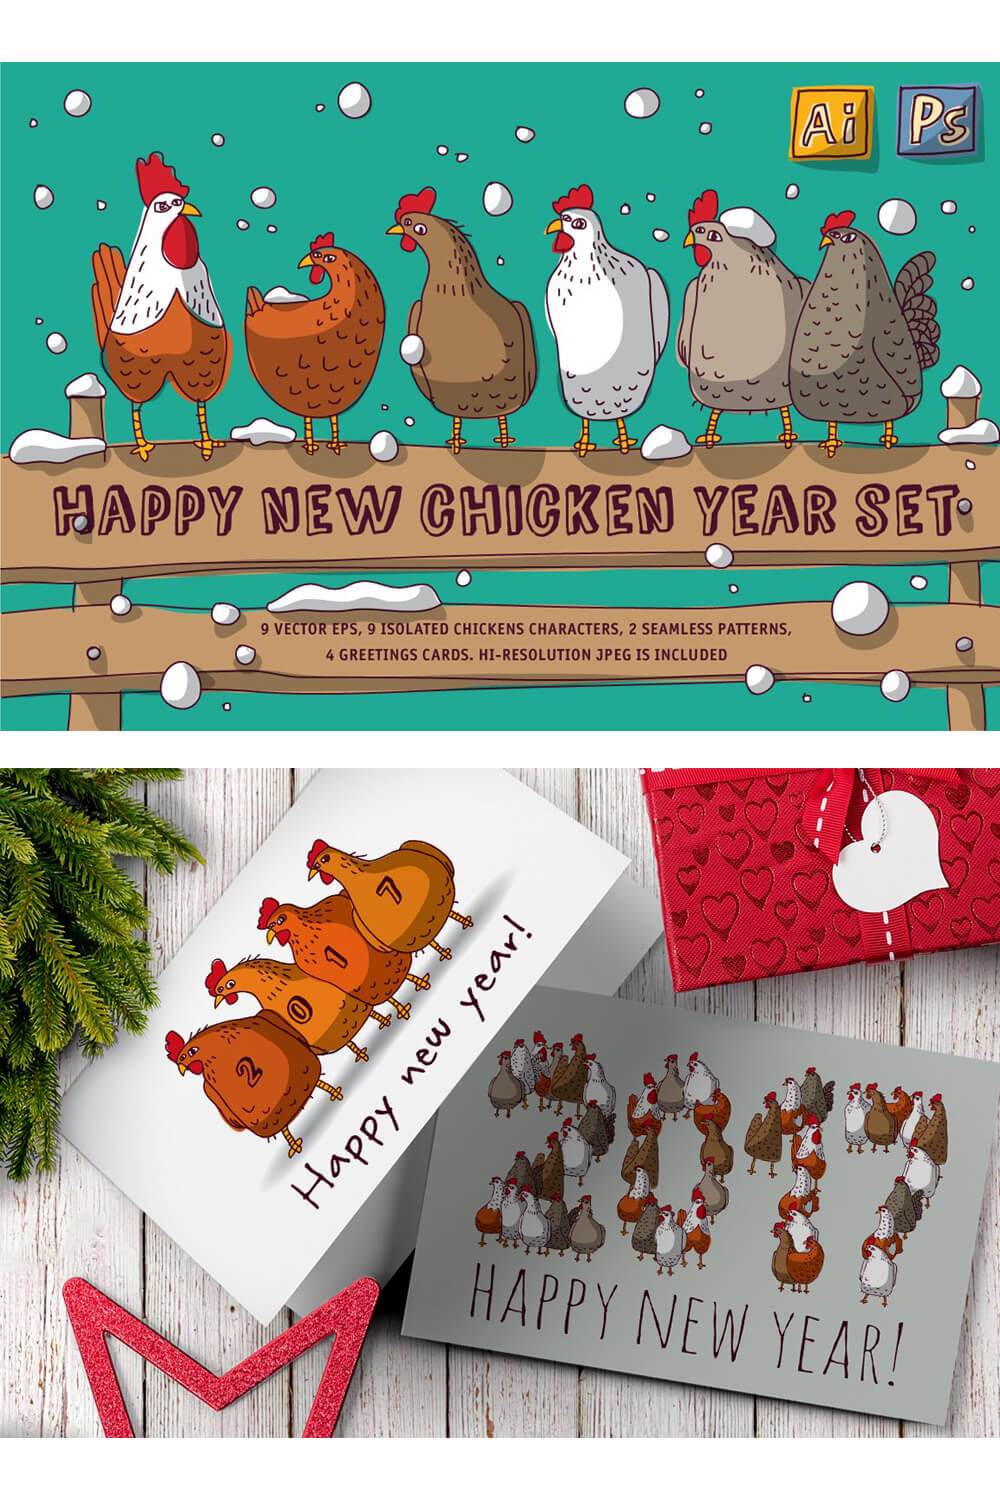 9 isolated chickens characters and 2 seamless patterns.